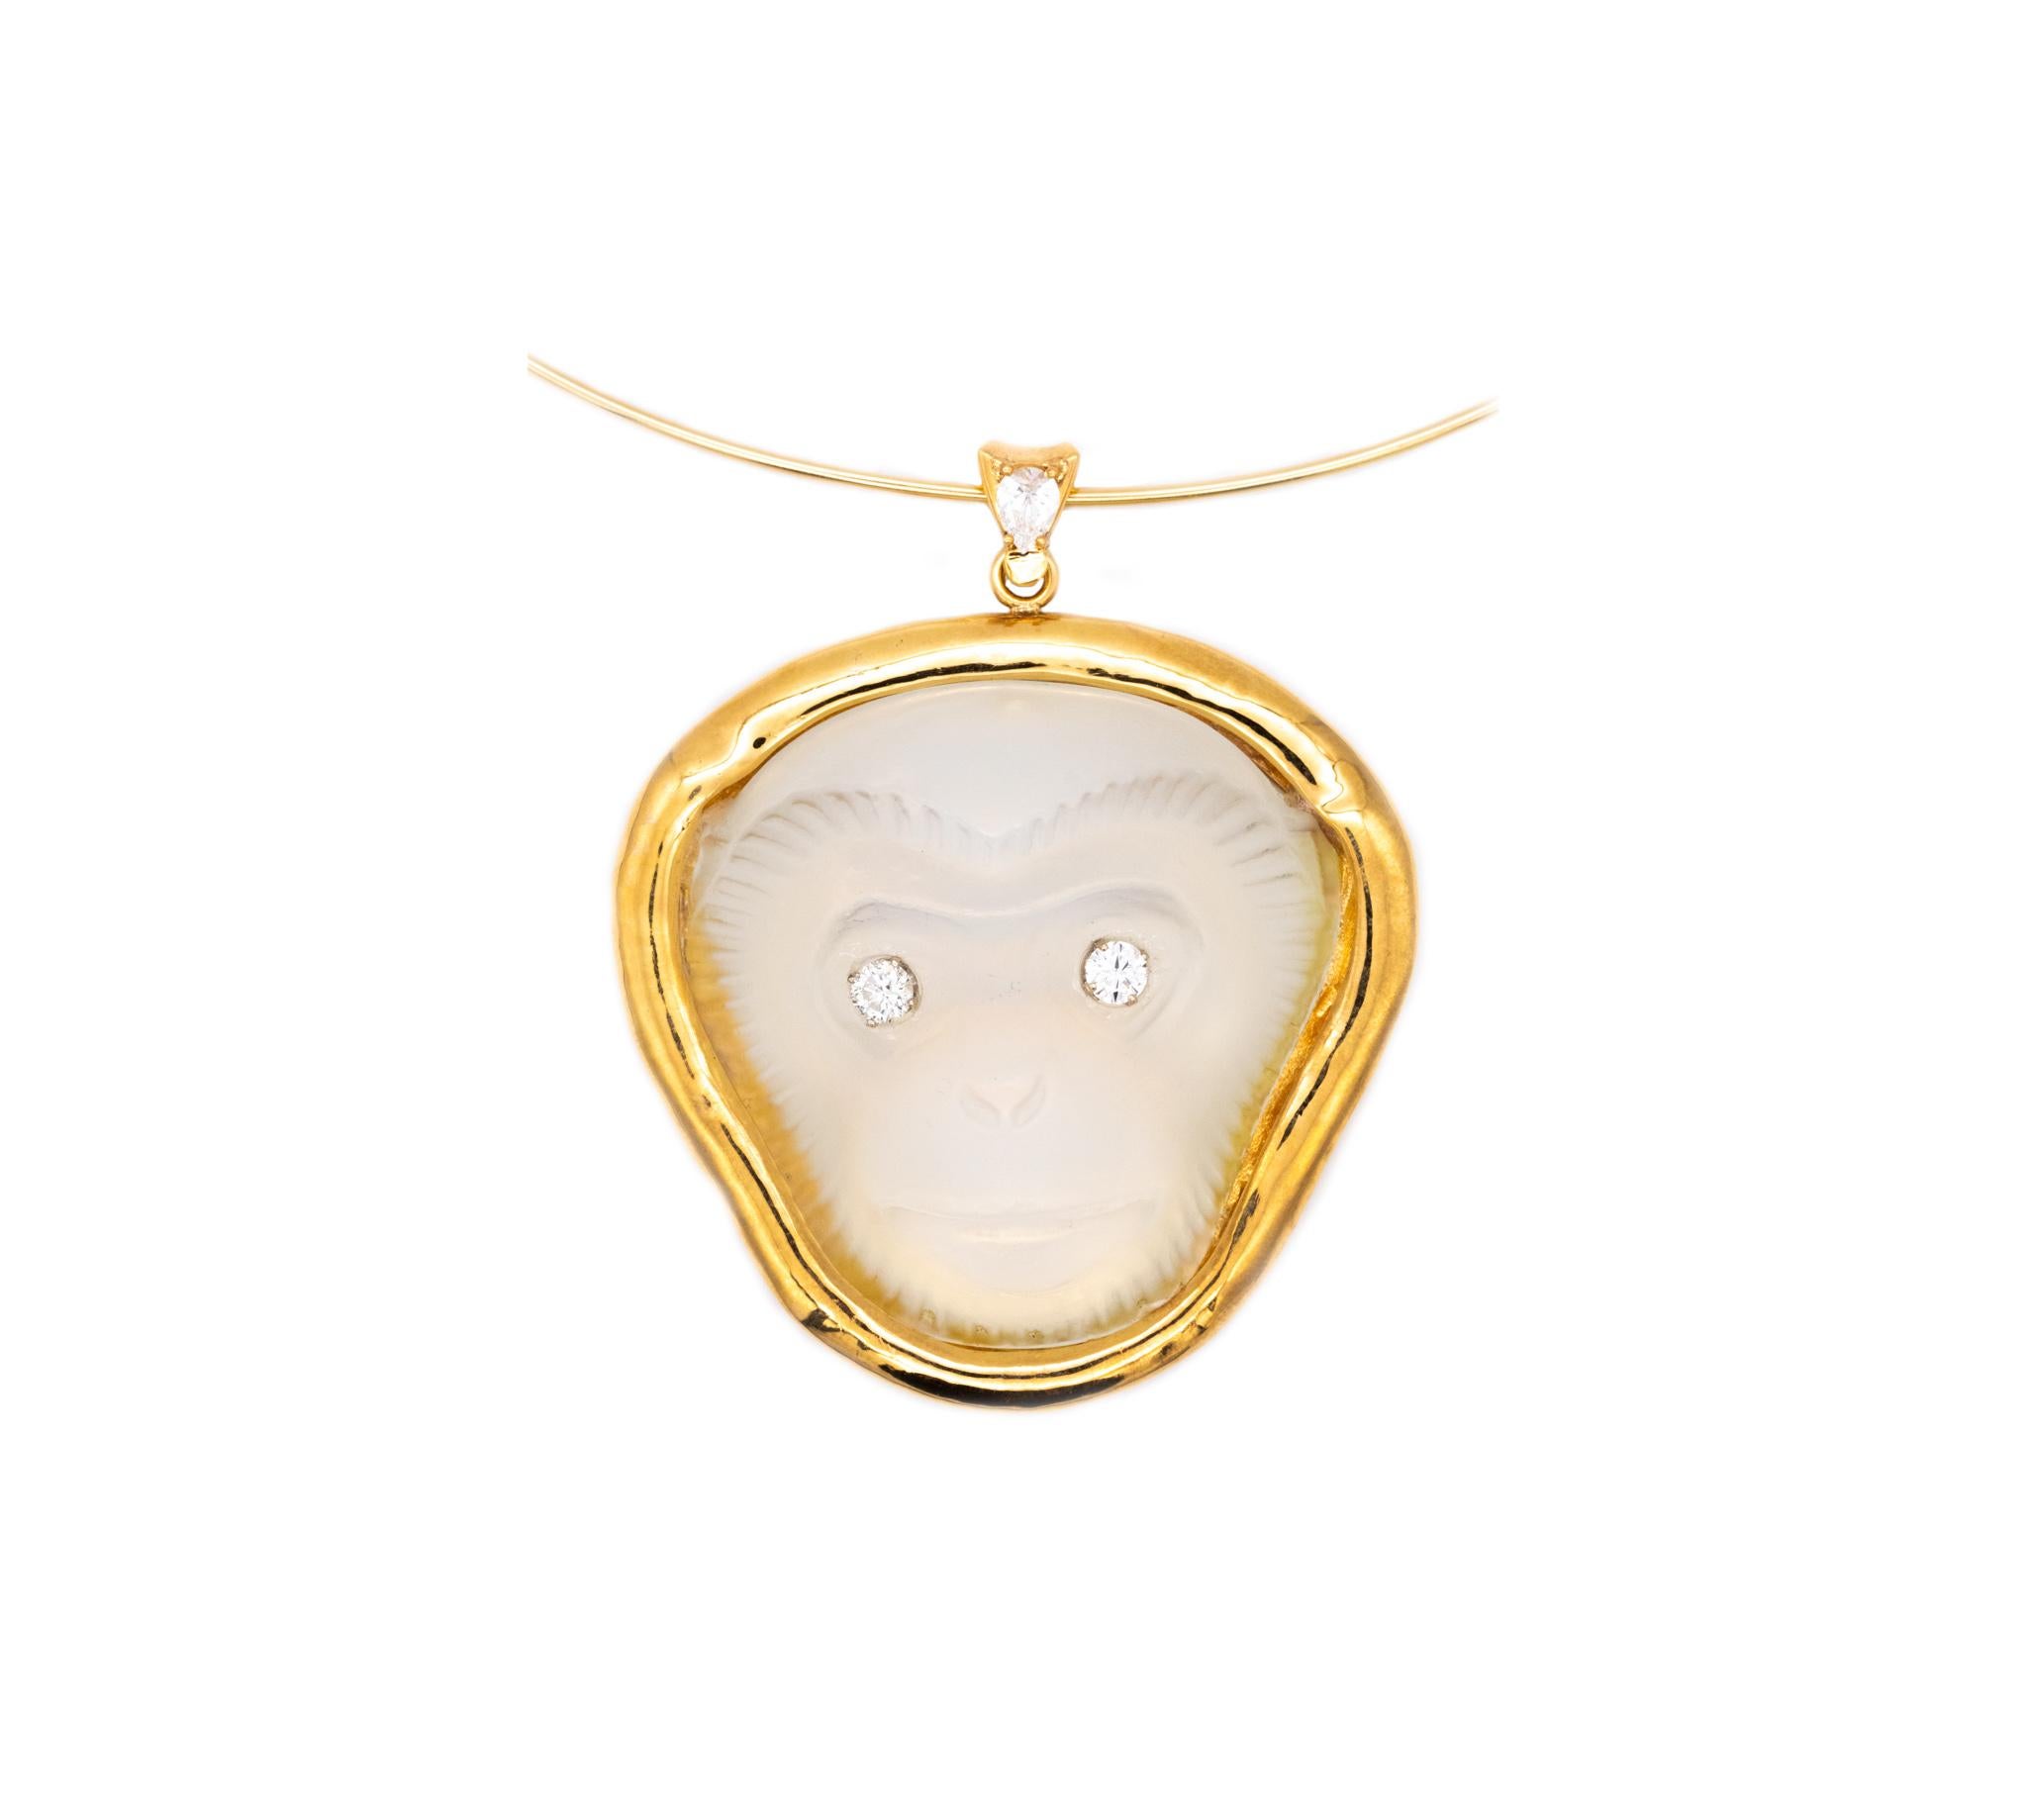 Massive Monkey pendant designed by Sabino.

A highly impressive statement piece of a three-dimensional monkey face, mounted in a free form frame, crafted in solid 18 karats of polished yellow gold with white gold accents for the settings of the